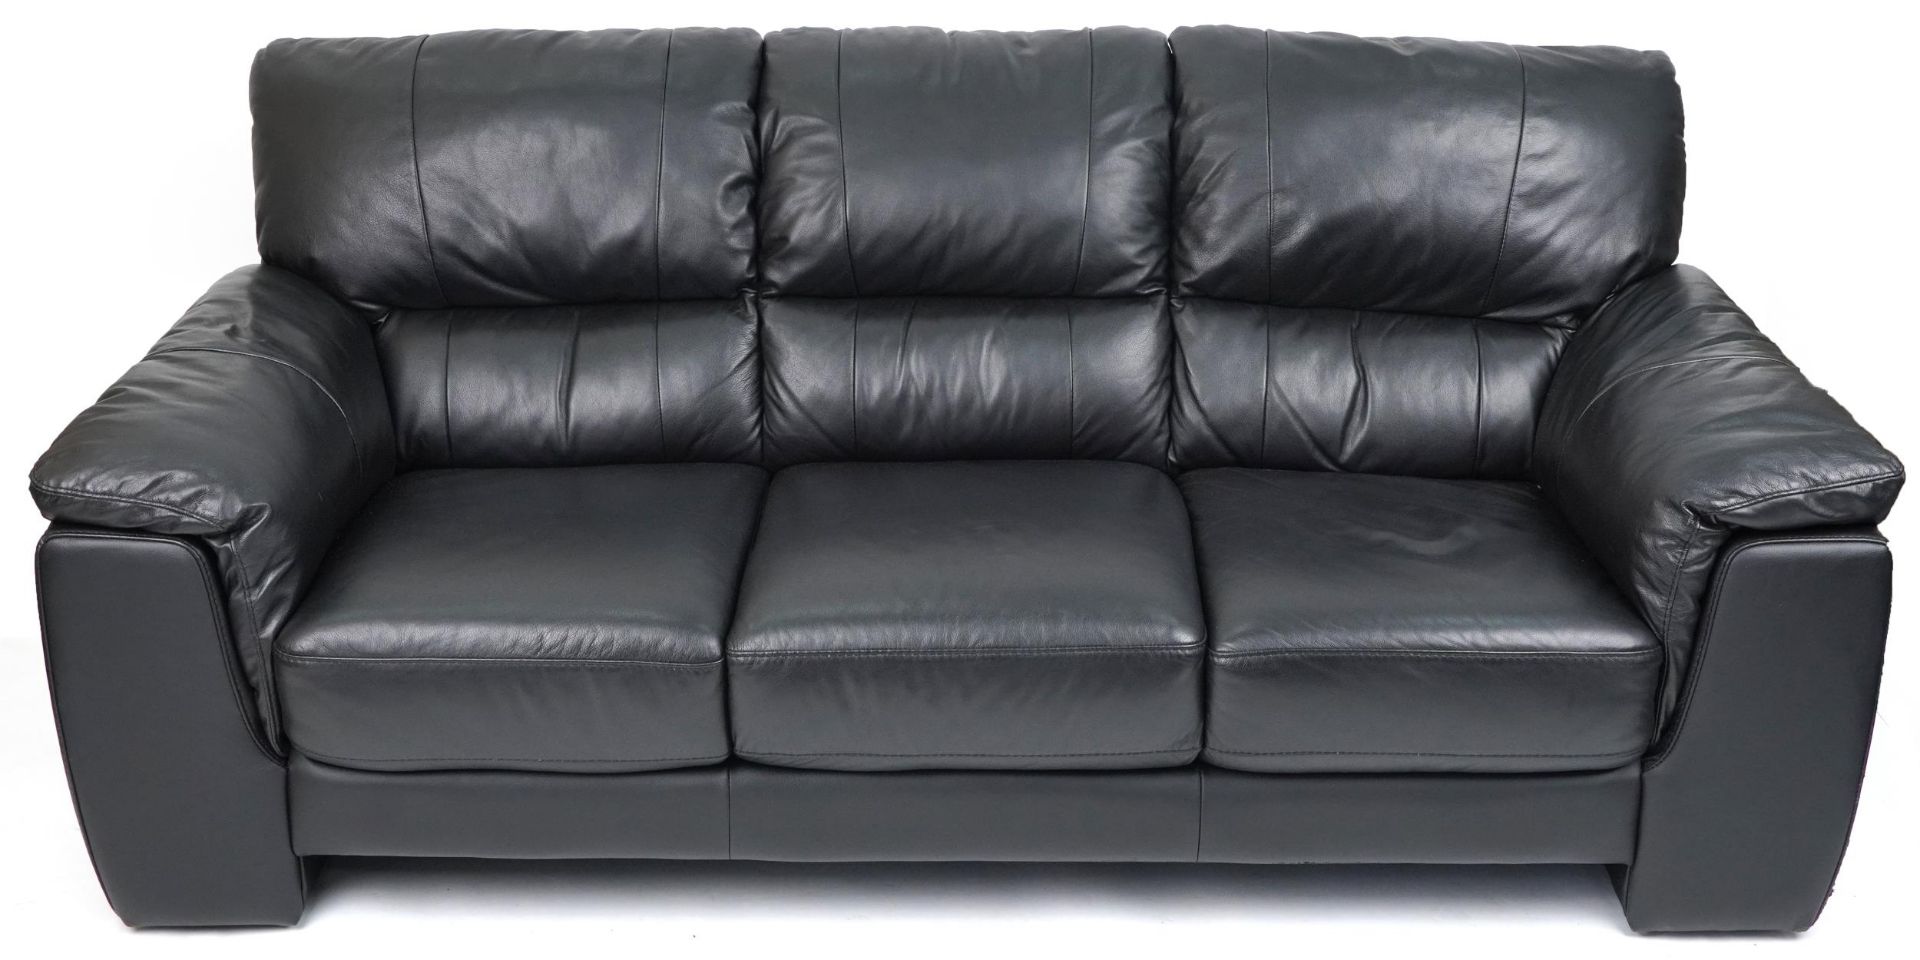 Contemporary three seater settee with black leather upholstery and footstool, the settee 90cm H x - Image 2 of 6